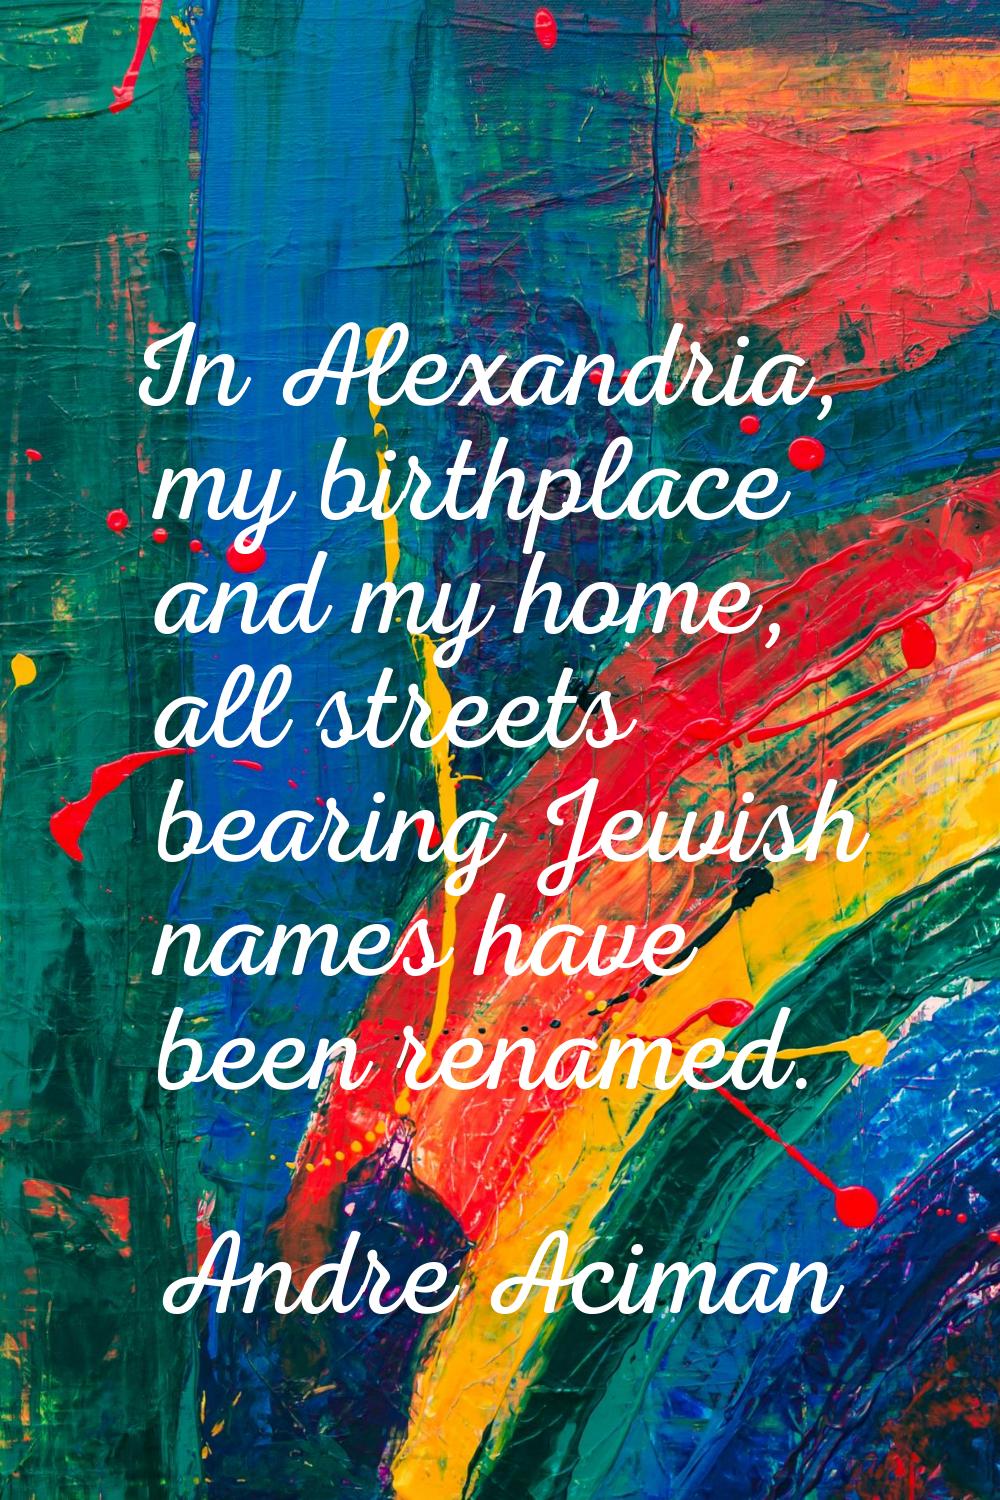 In Alexandria, my birthplace and my home, all streets bearing Jewish names have been renamed.